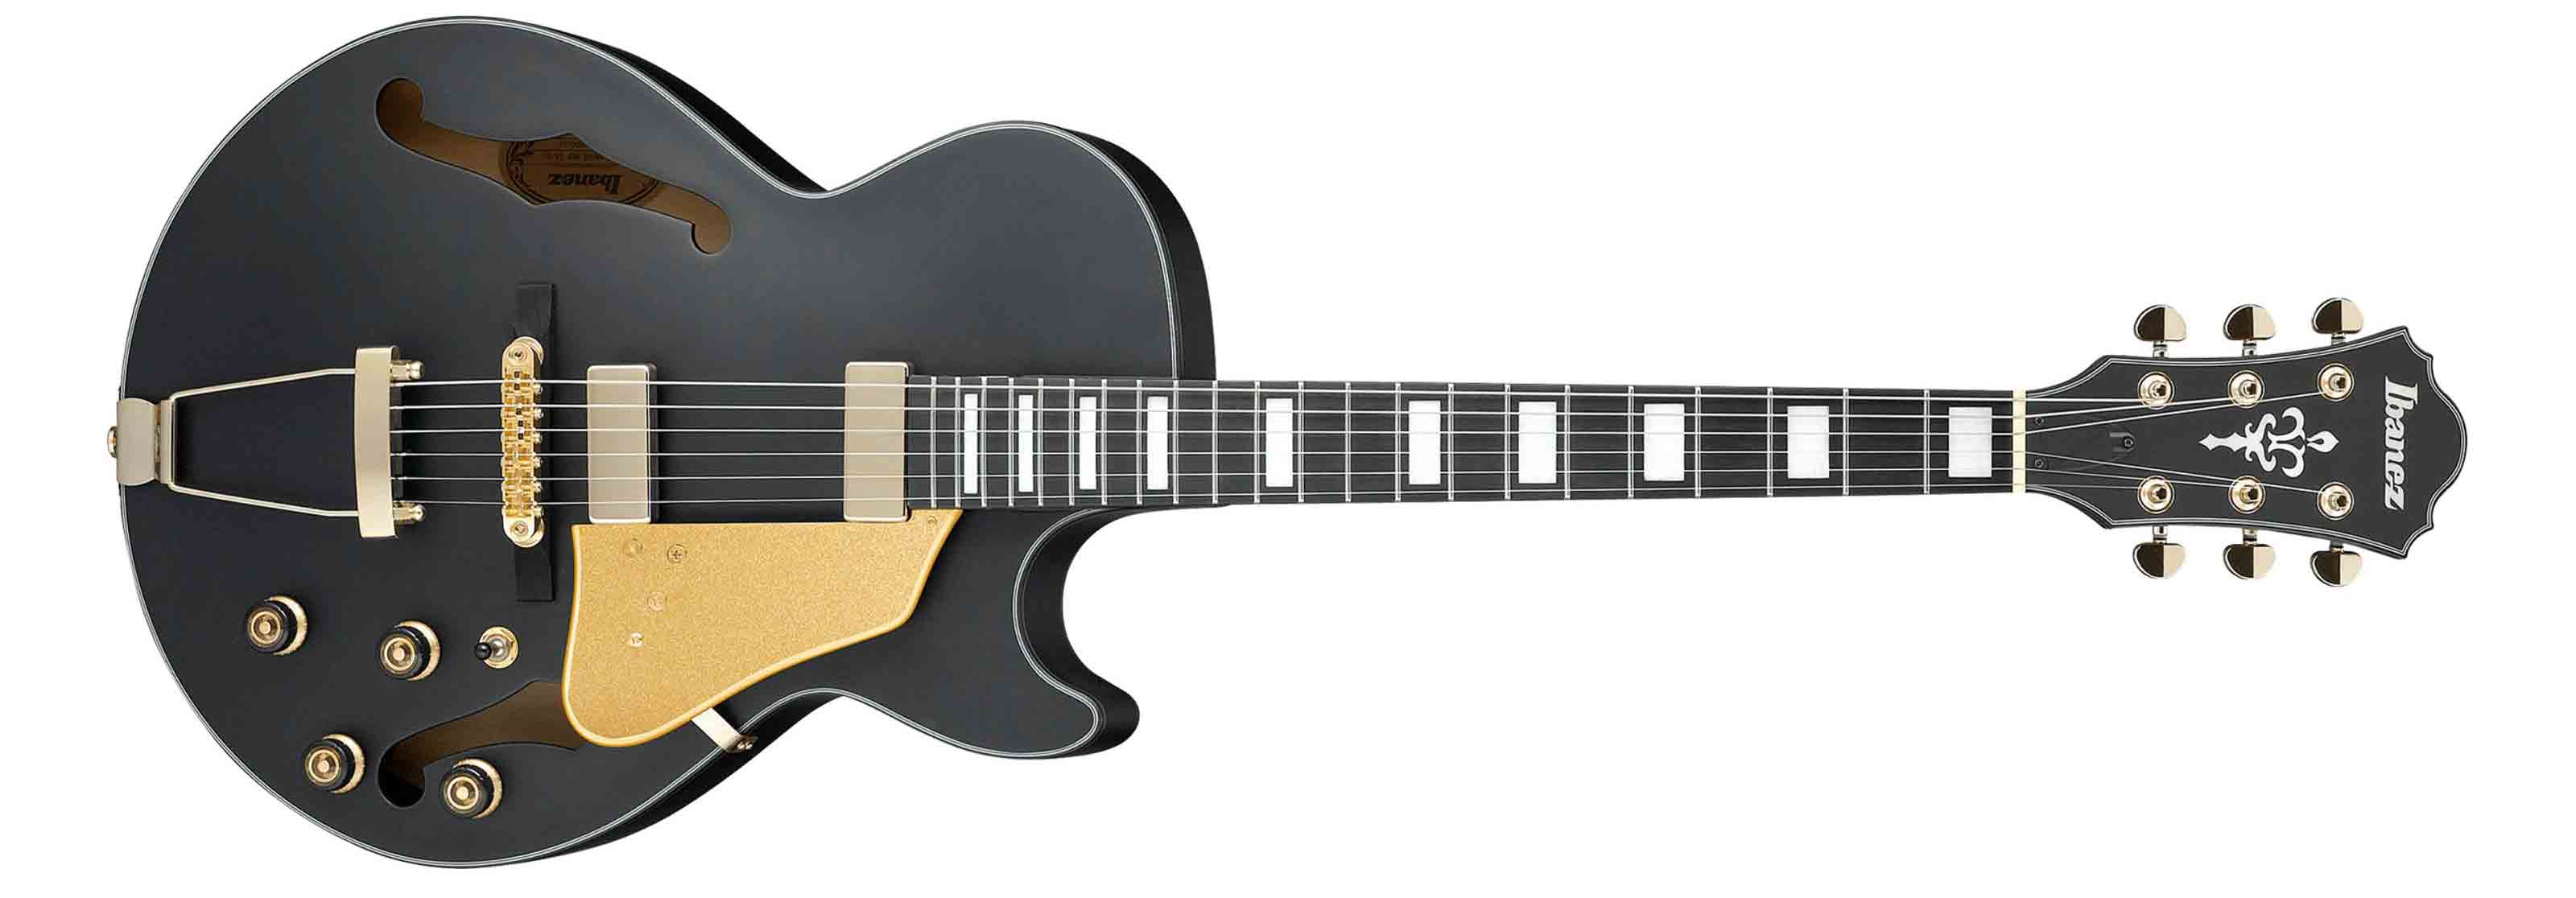 Ibanez Artcore Expressionistencial AG85-BKF Black Flat Front